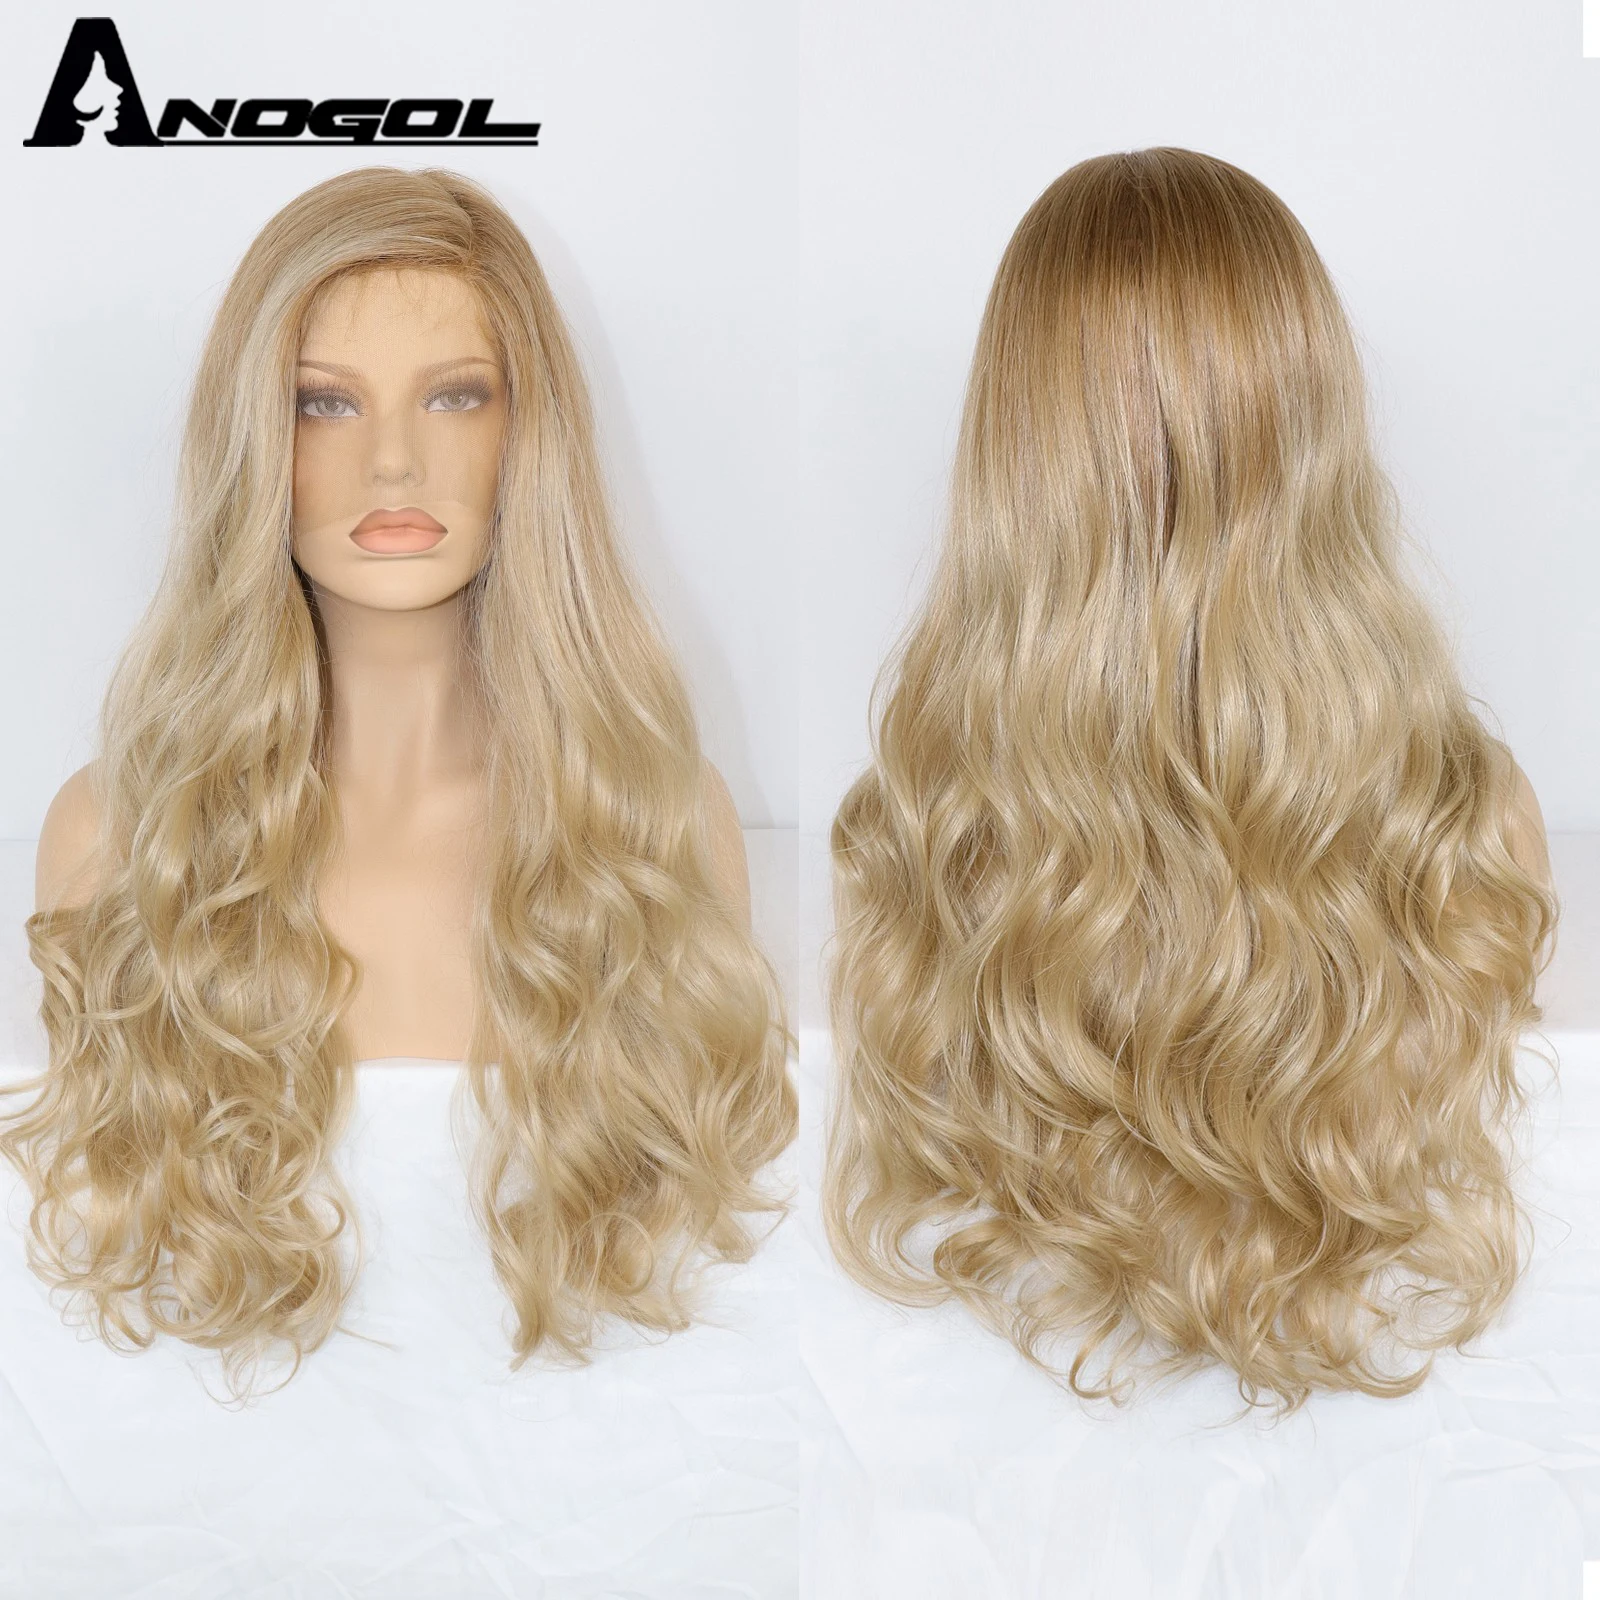 ANOGOL Synthetic Light Blonde Long Natural Wavy U Part Lace Wigs 28Inch Ombre Black Fake Hair Heat Resistant Fiber Wig for Women